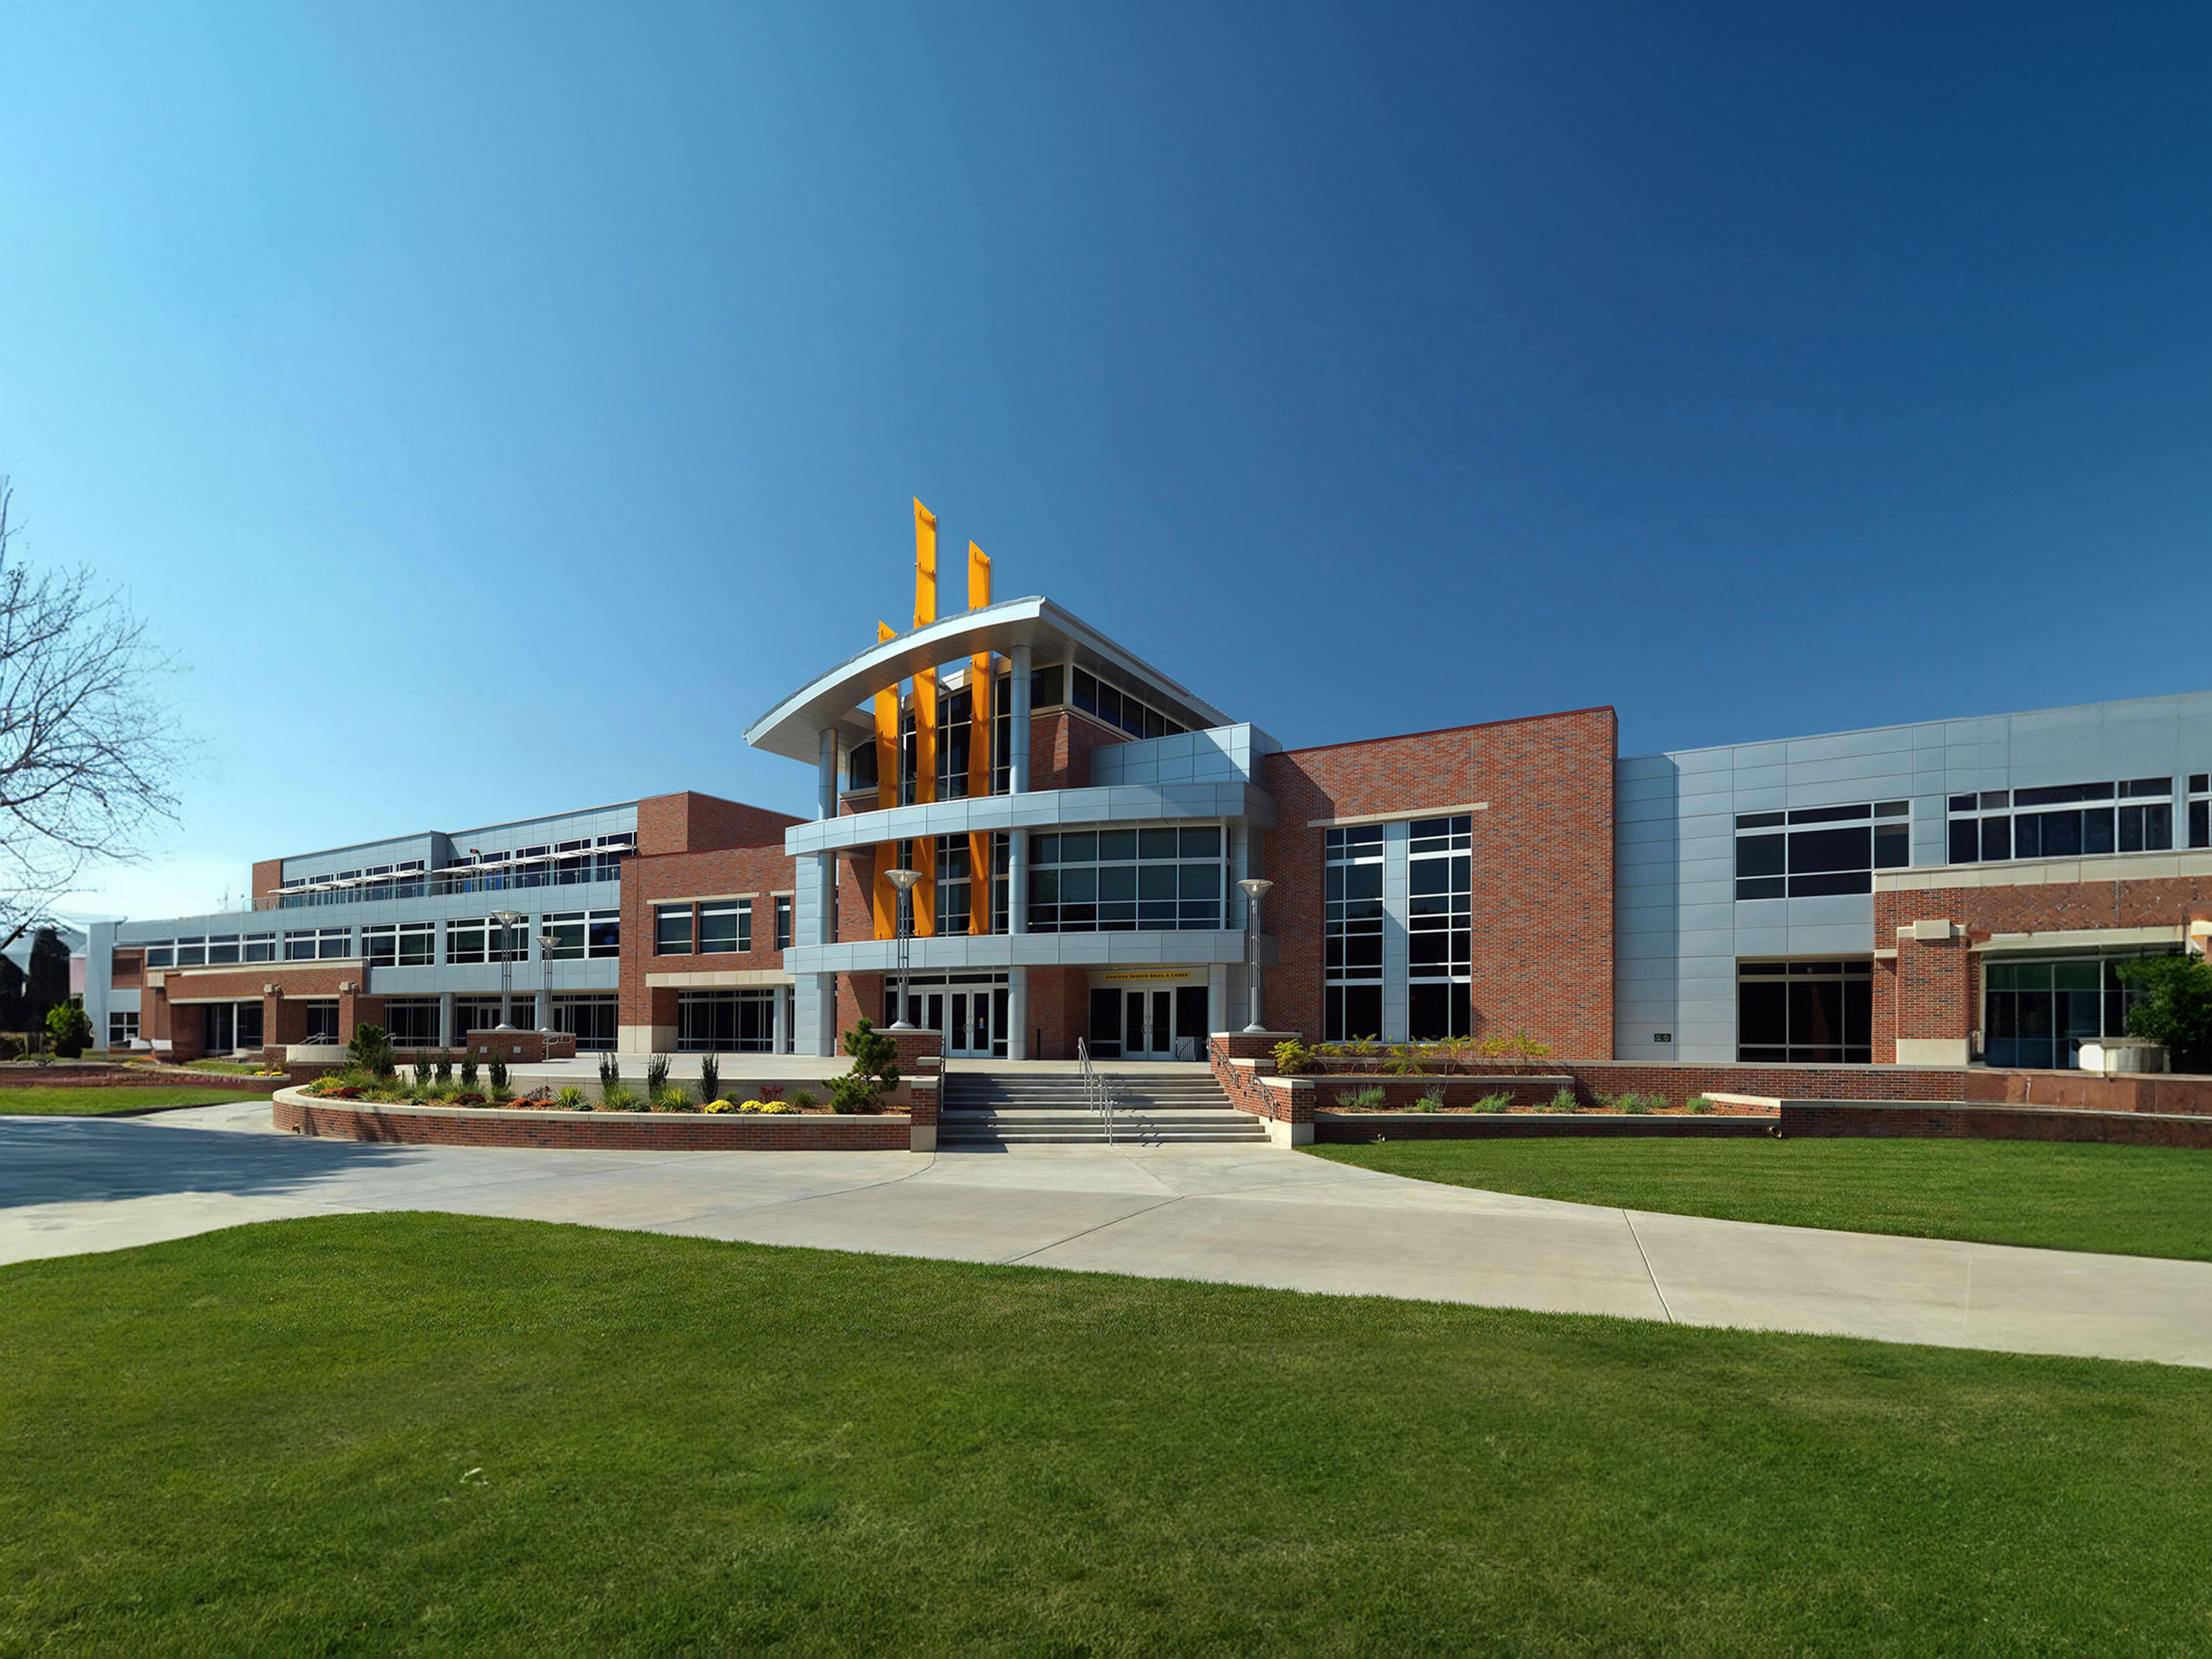 View of the east side of the Rhatigan Student Center during the day.